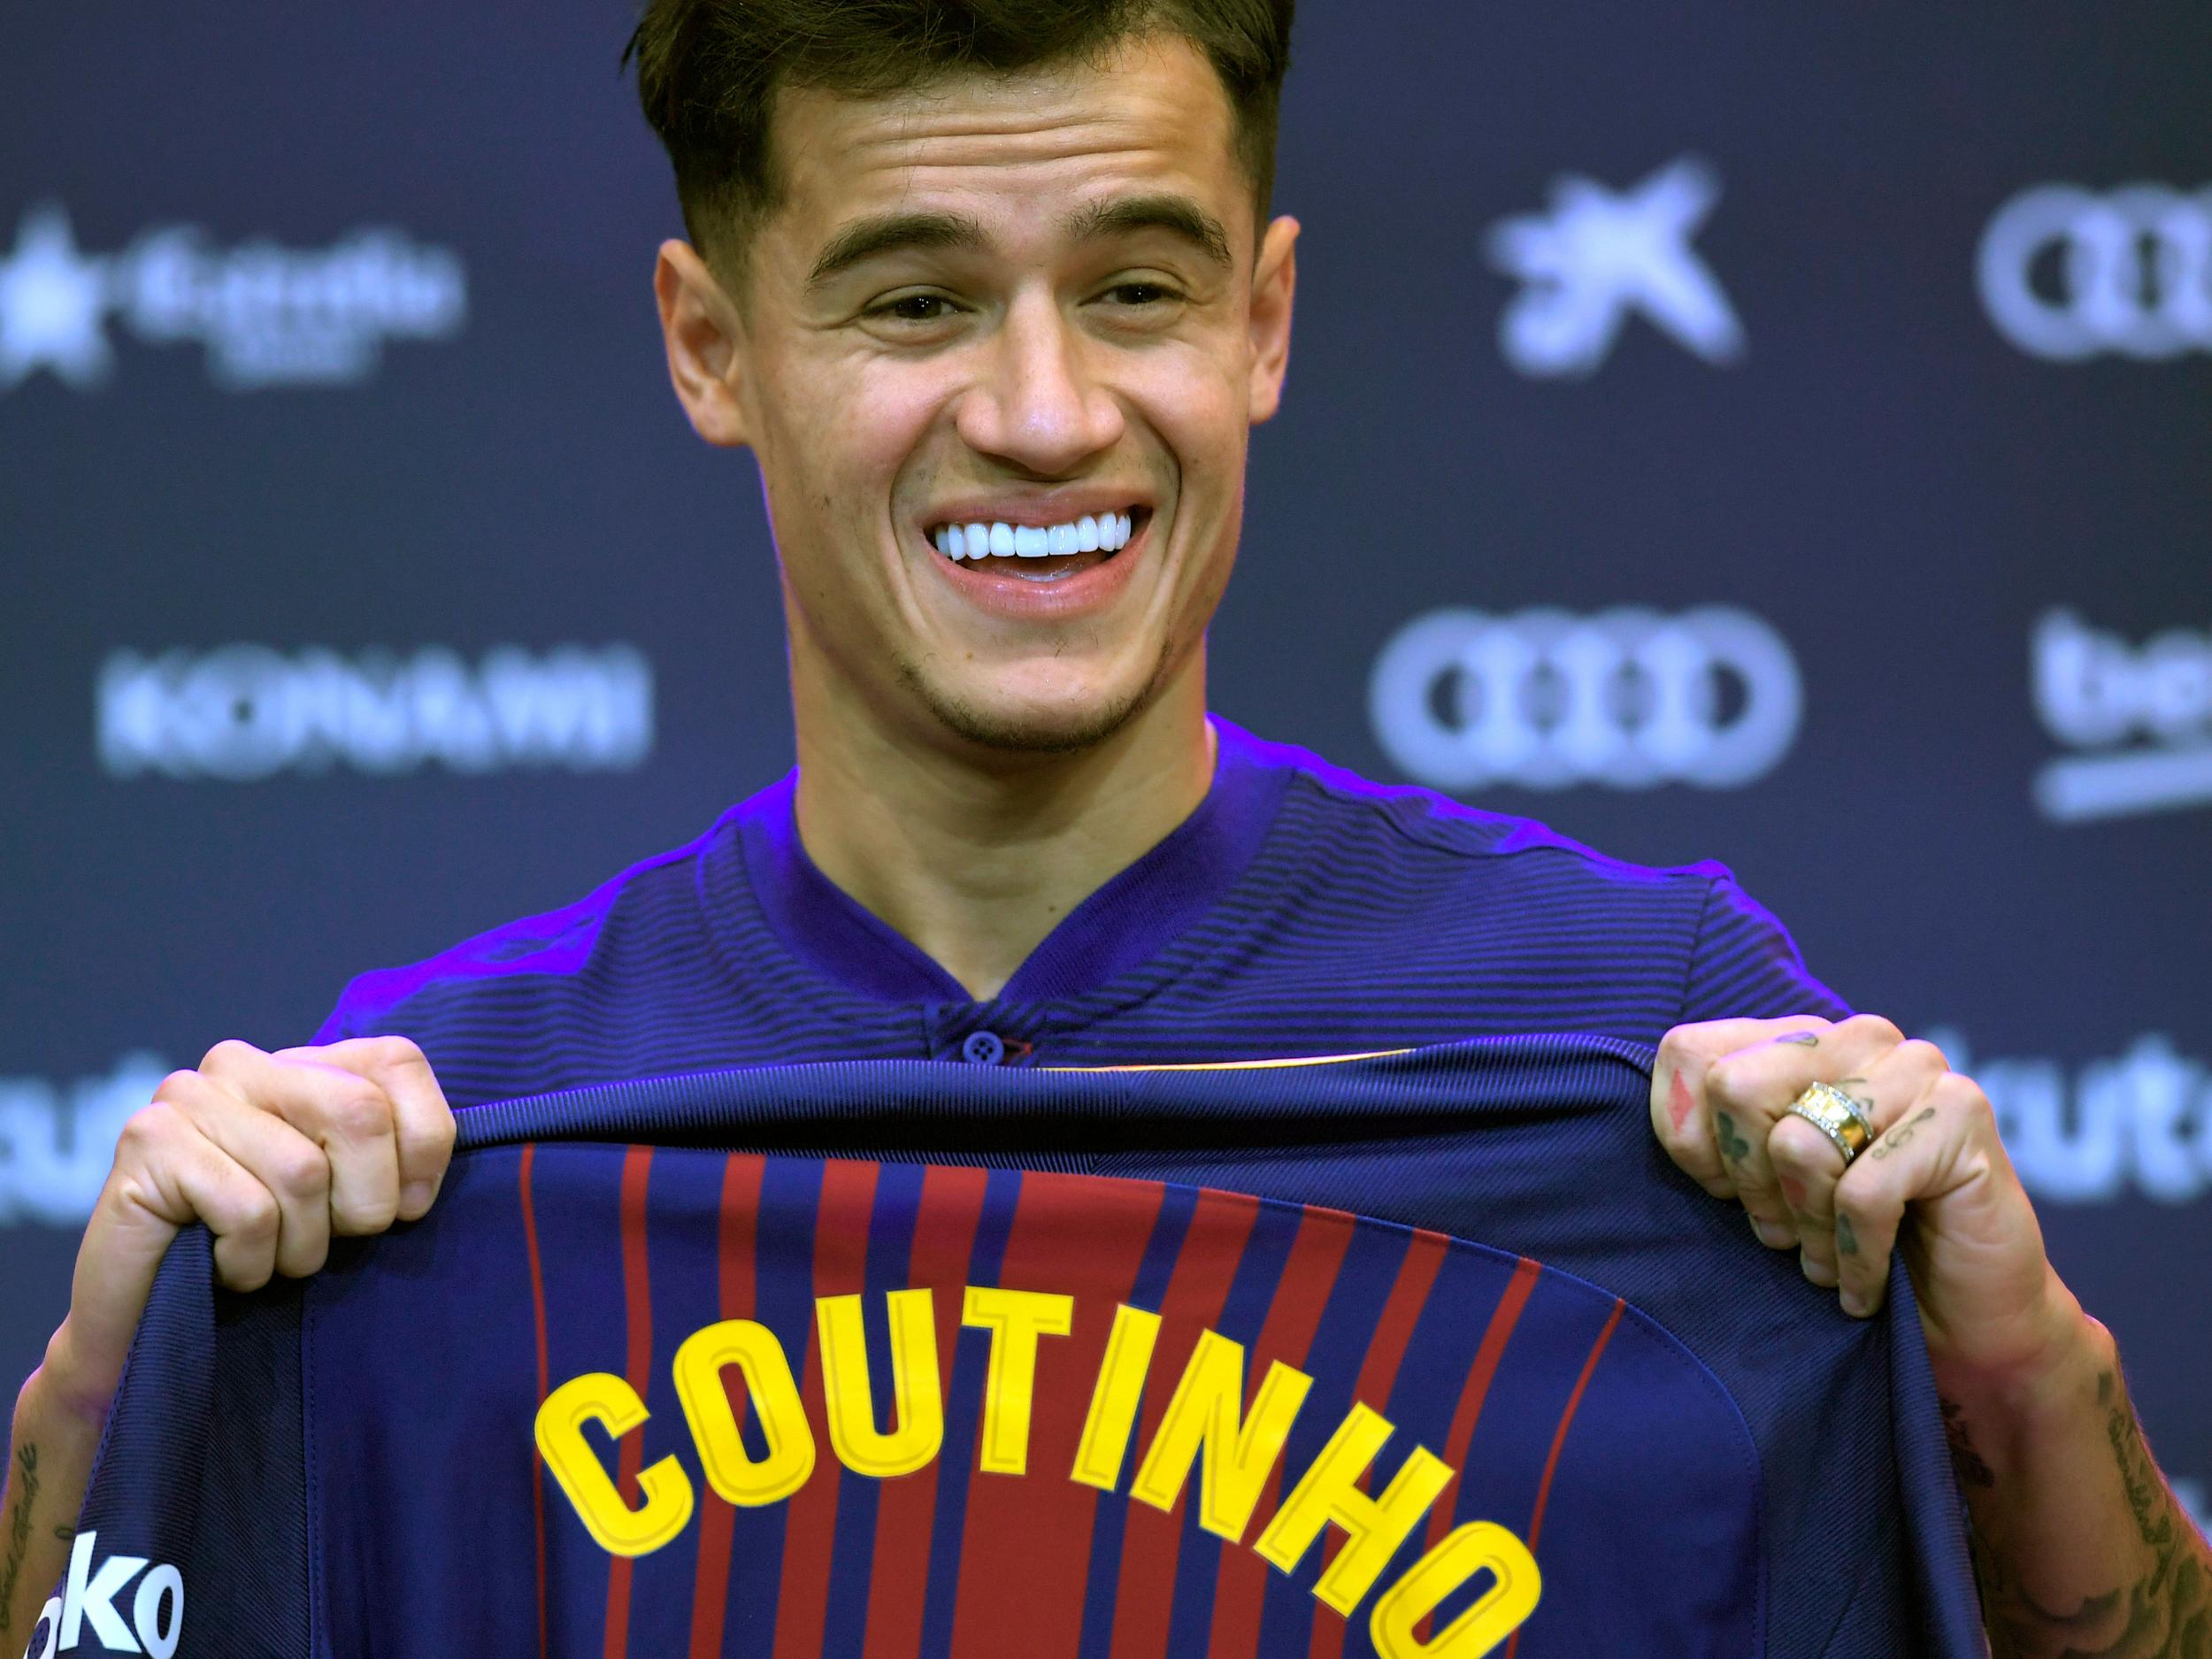 Philippe Coutinho completed his long-awaited move to Barcelona earlier this week